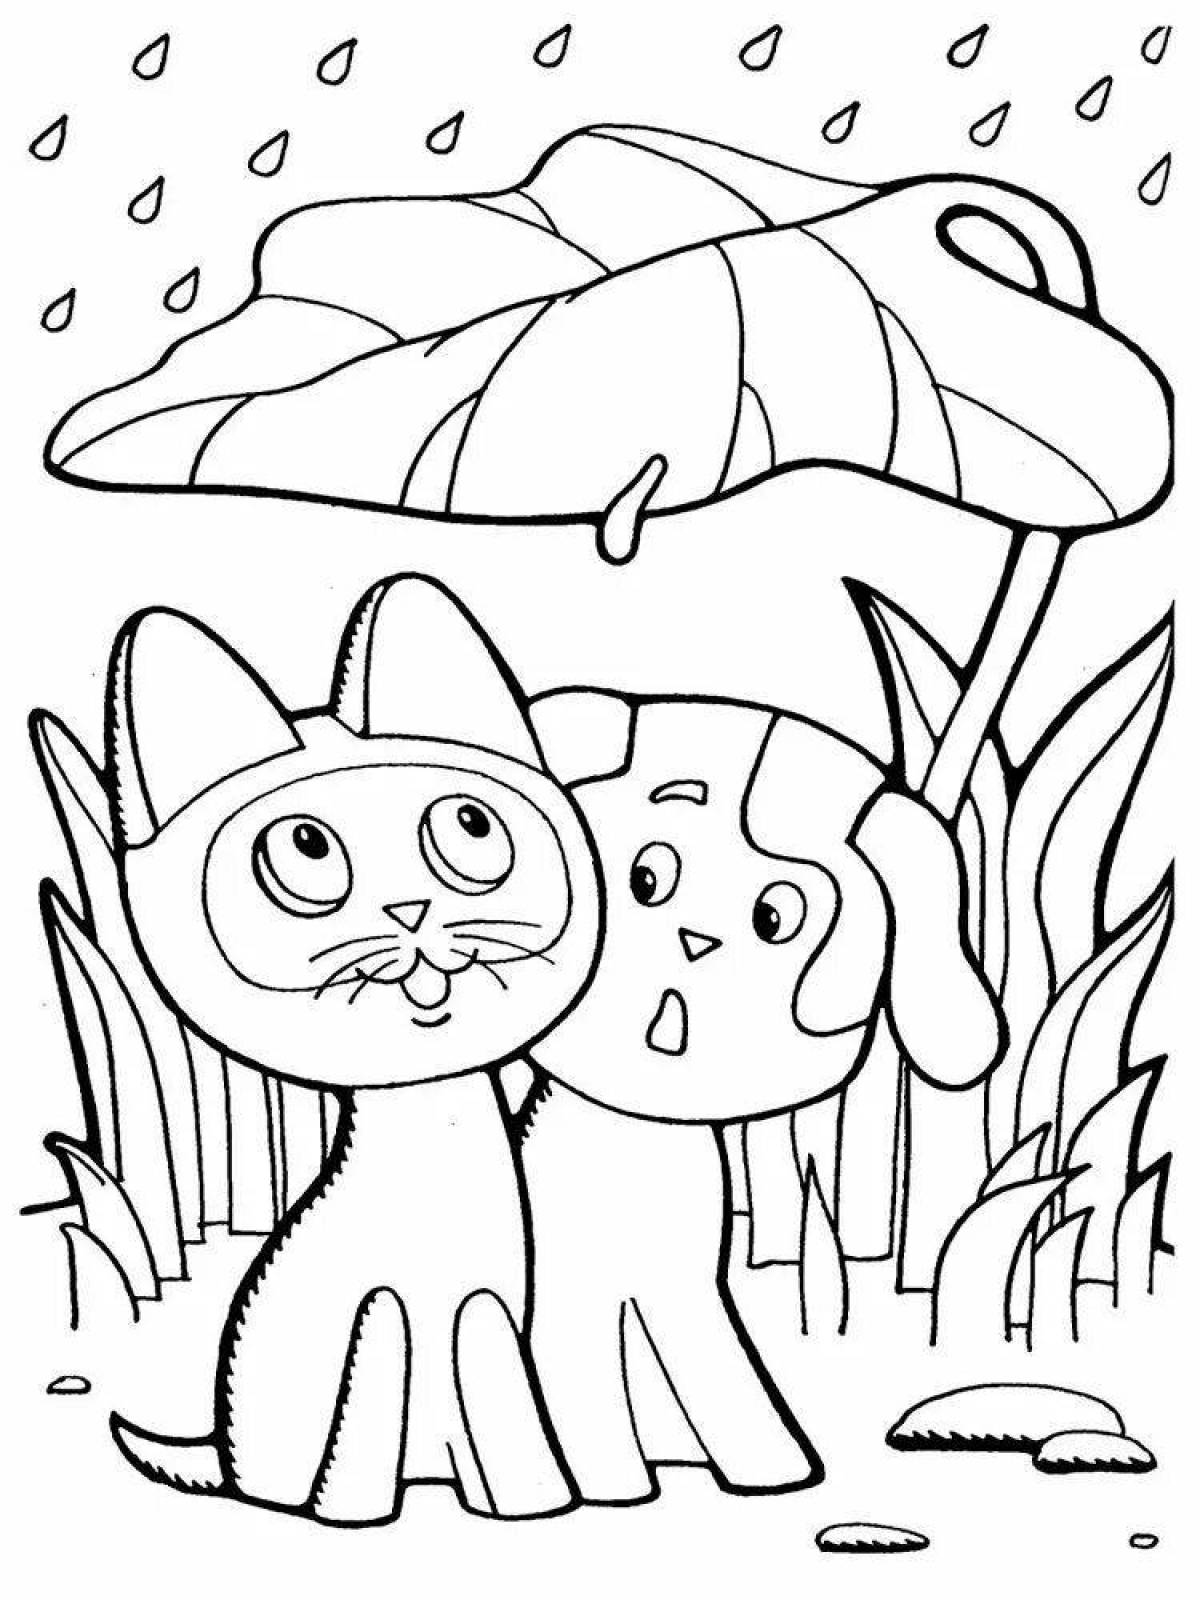 Creative coloring book for 5-6 year old cartoon children